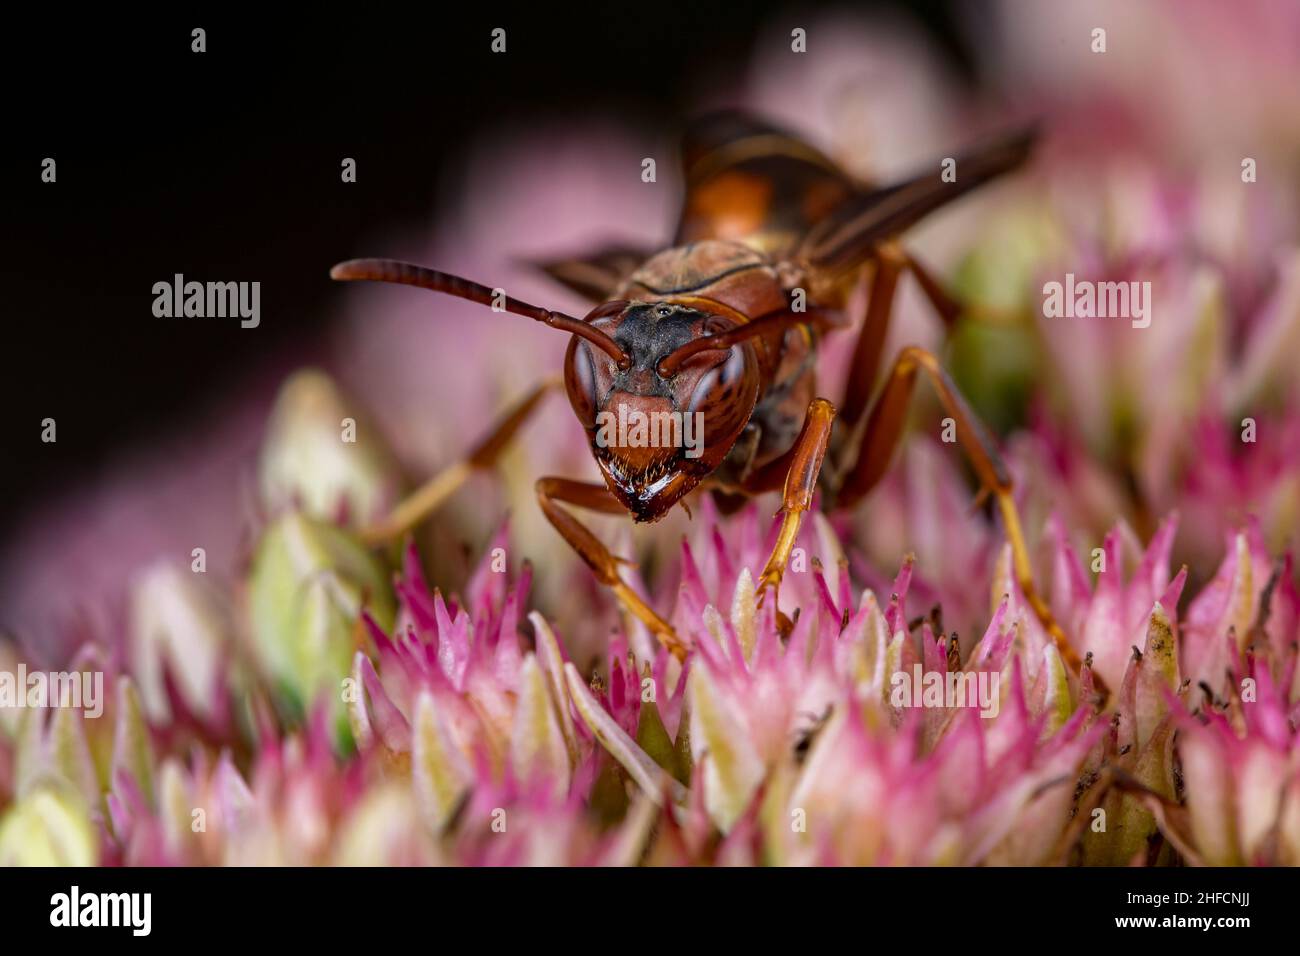 Northern Paper Wasp feeding on nectar from Sedum plant. Insect and wildlife conservation, habitat preservation, and backyard flower garden concept. Stock Photo